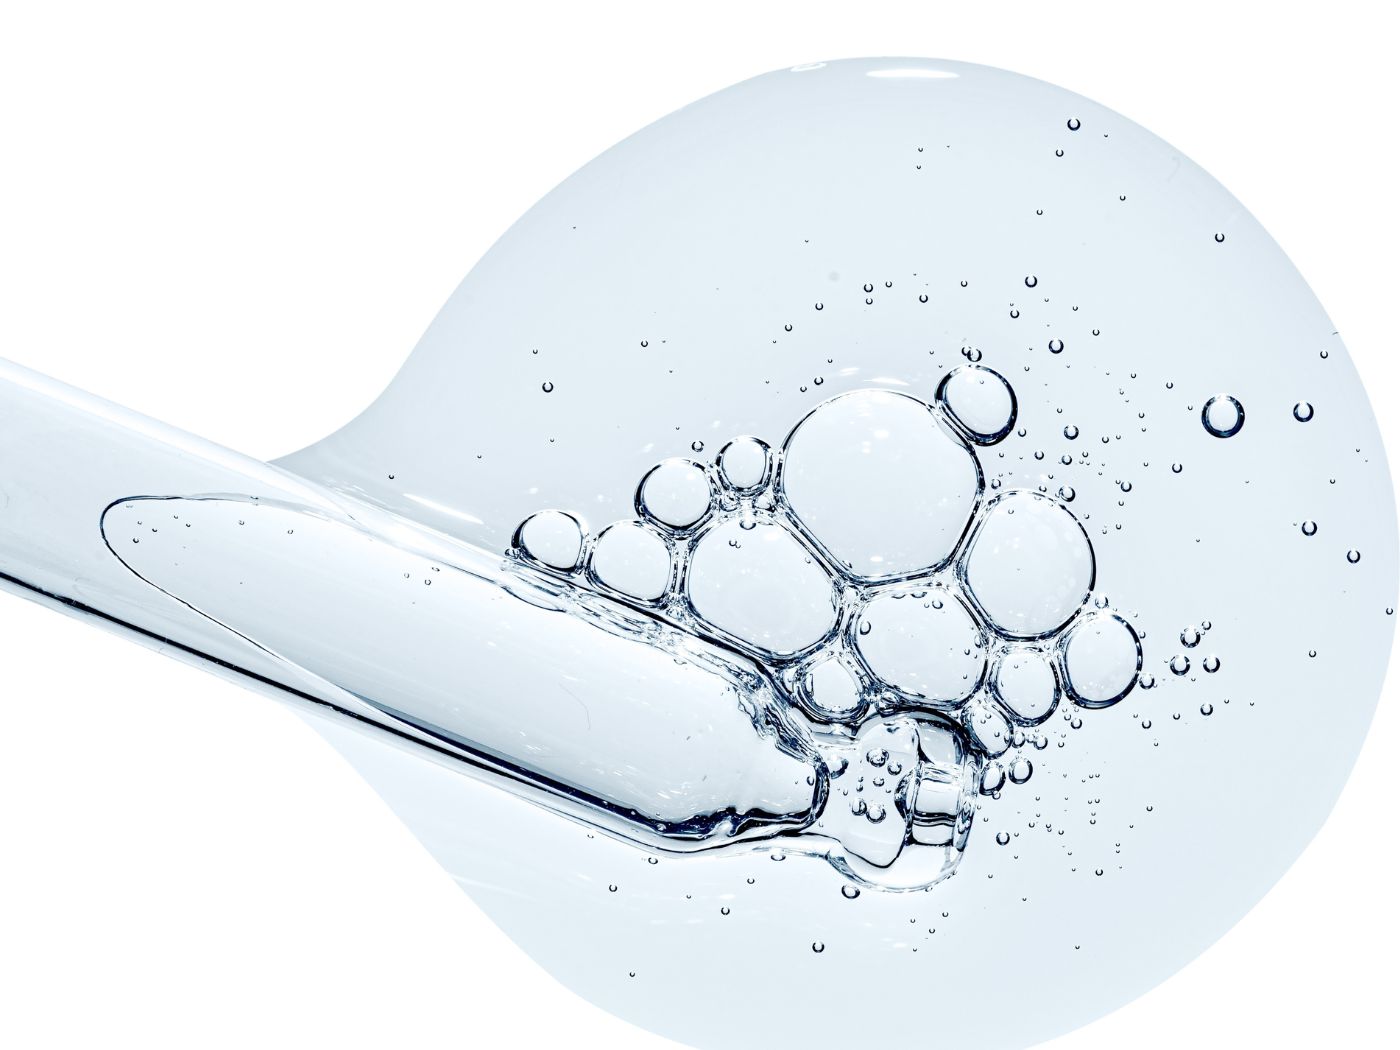 Squalene Or Hyaluronic Acid For Skin Hydration? What To Choose?